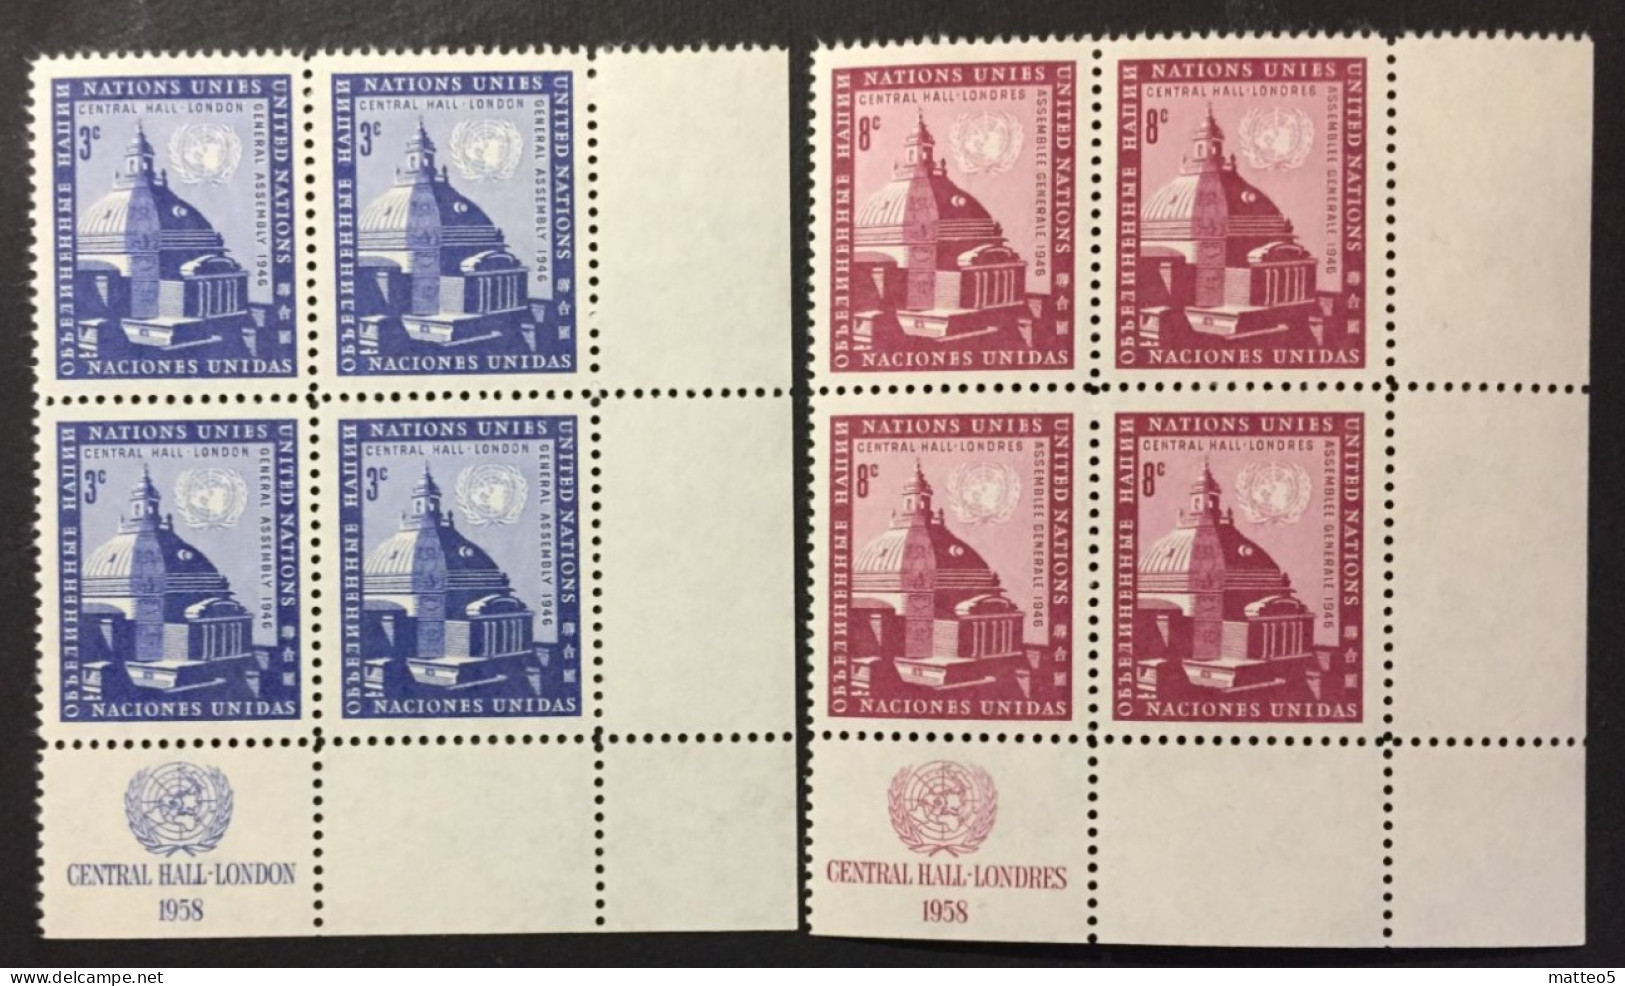 1958 - United Nations UNO UN ONU - General Assembly, UNN Assembly Buildings - 2 X4 Stamps Unused - Nuovi